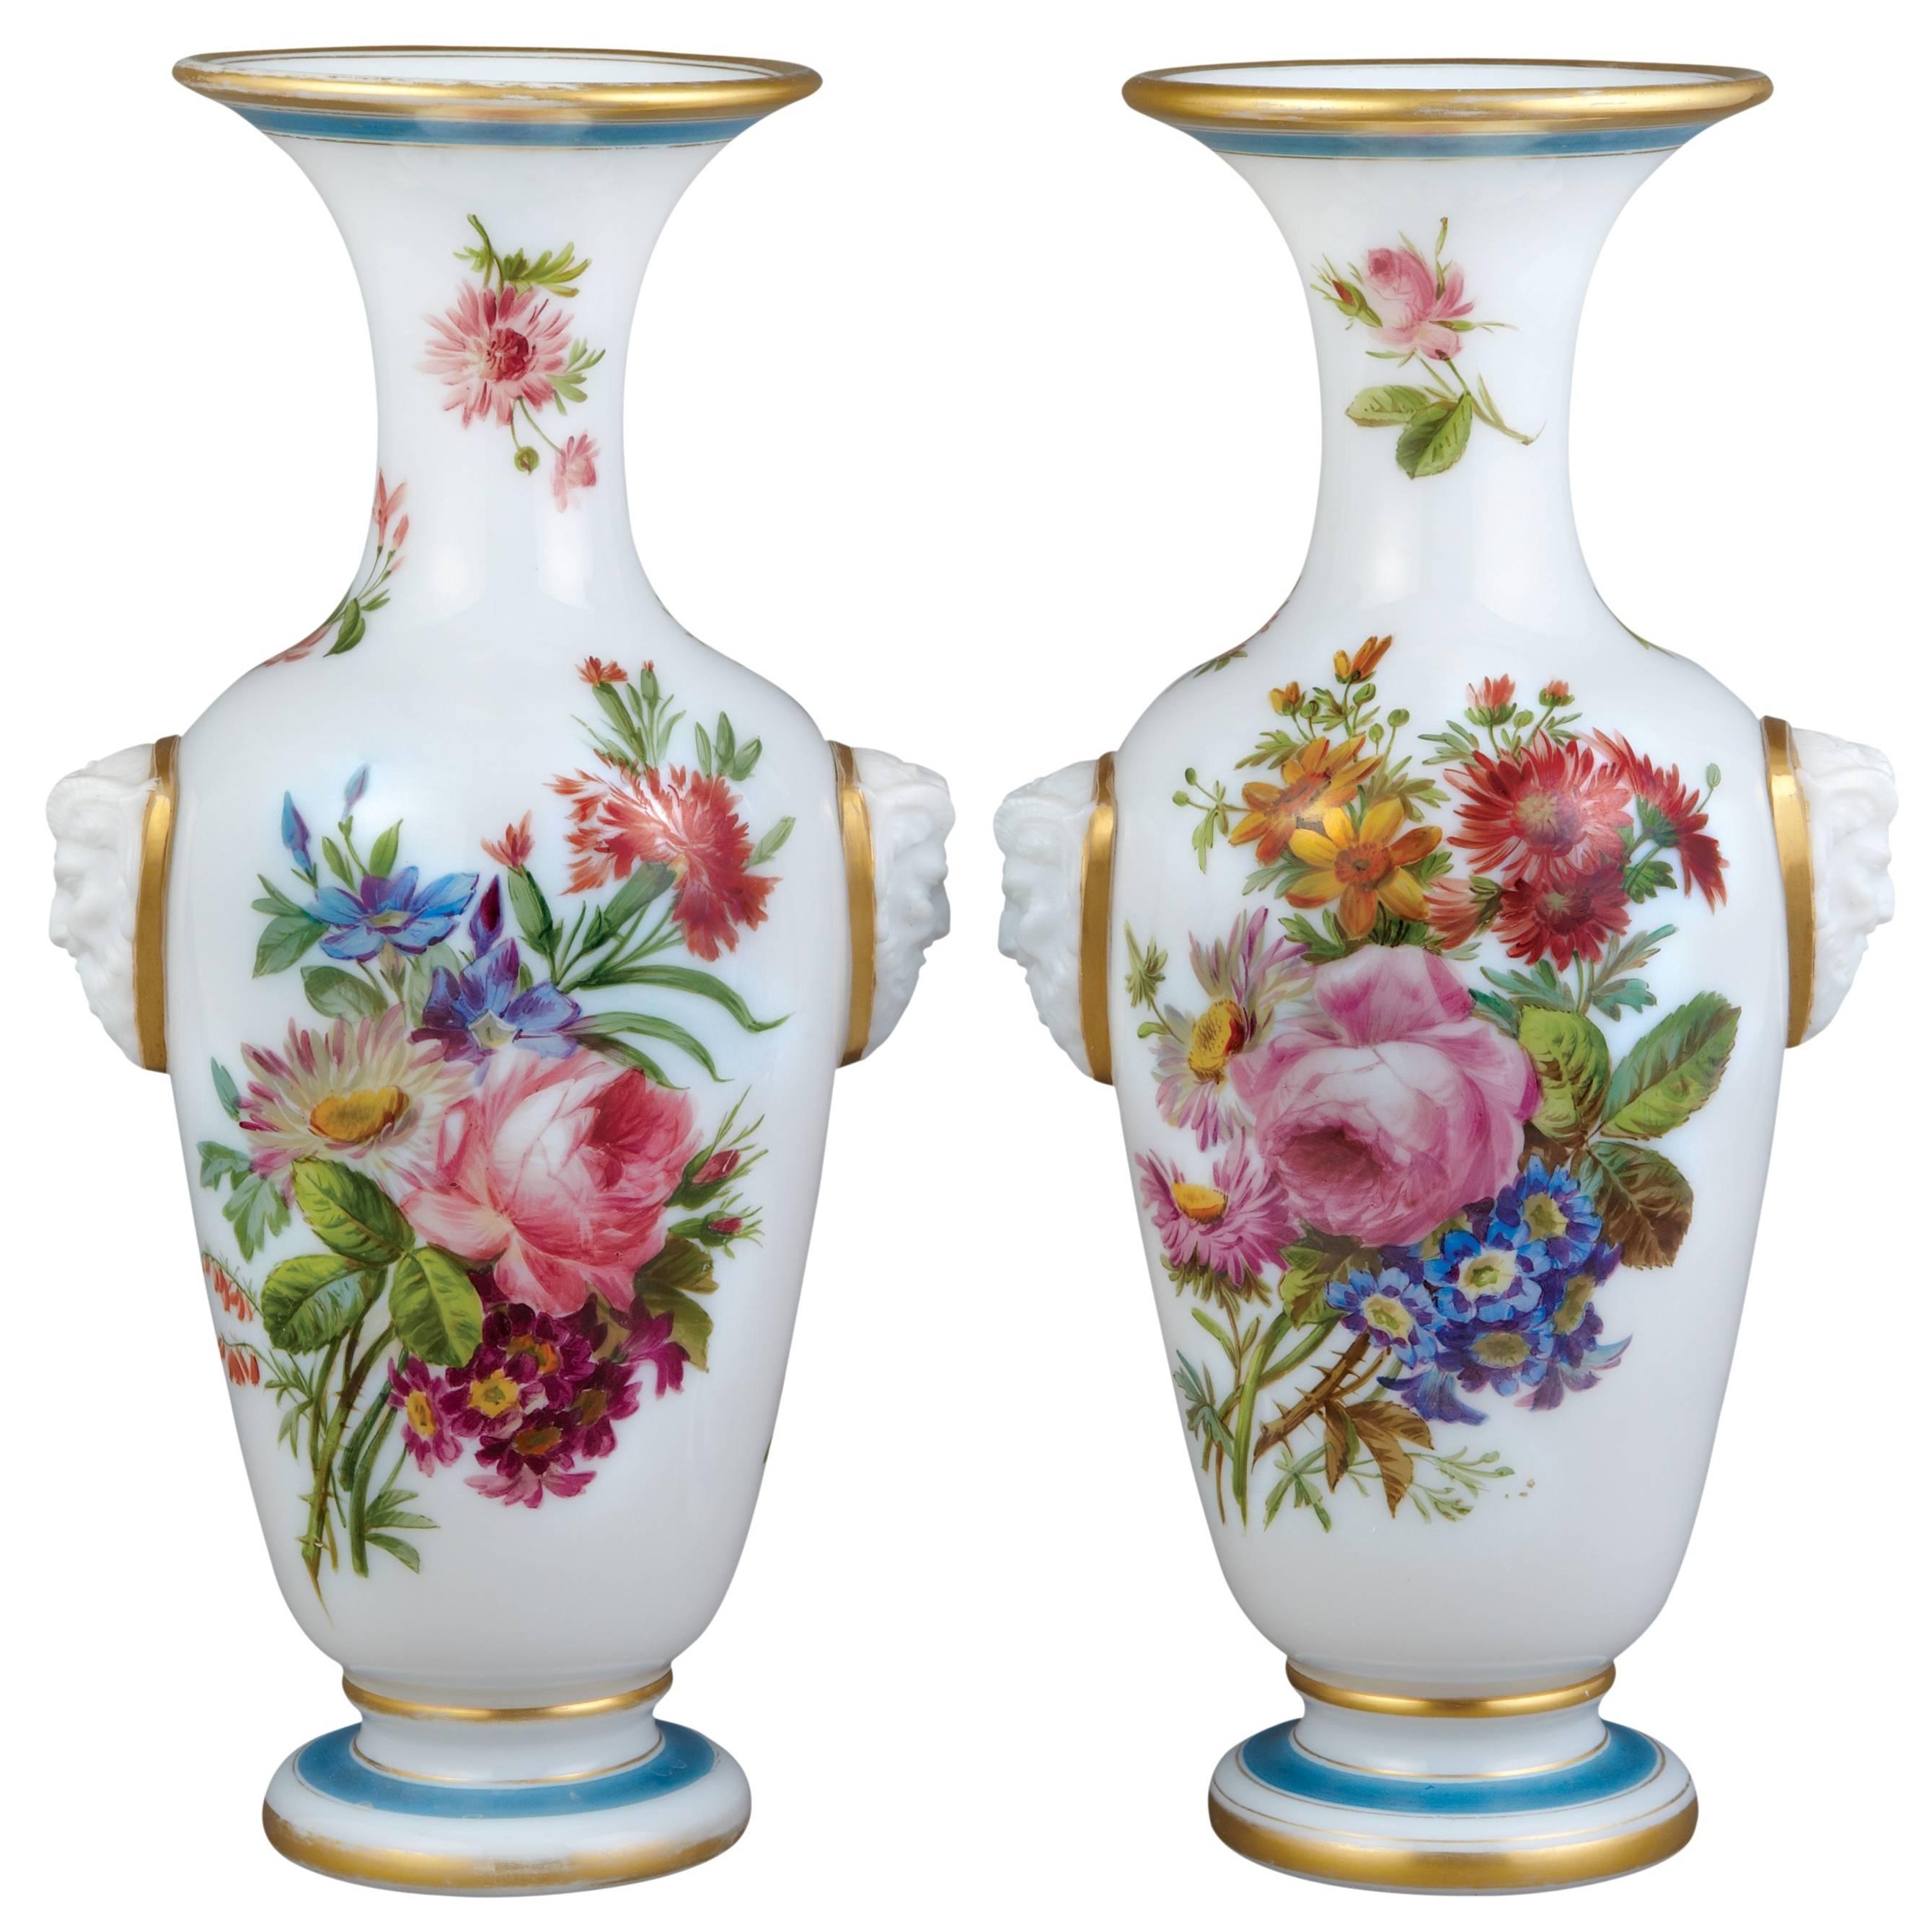 Pair of French floral opaline glass vases by Baccarat
French, c. 1850
Height 35cm, width 18cm, depth 14cm

These Baccarat opaline glass vases are of traditional form, each with a white-ground bulbous body, a spreading foot, and a curved neck and